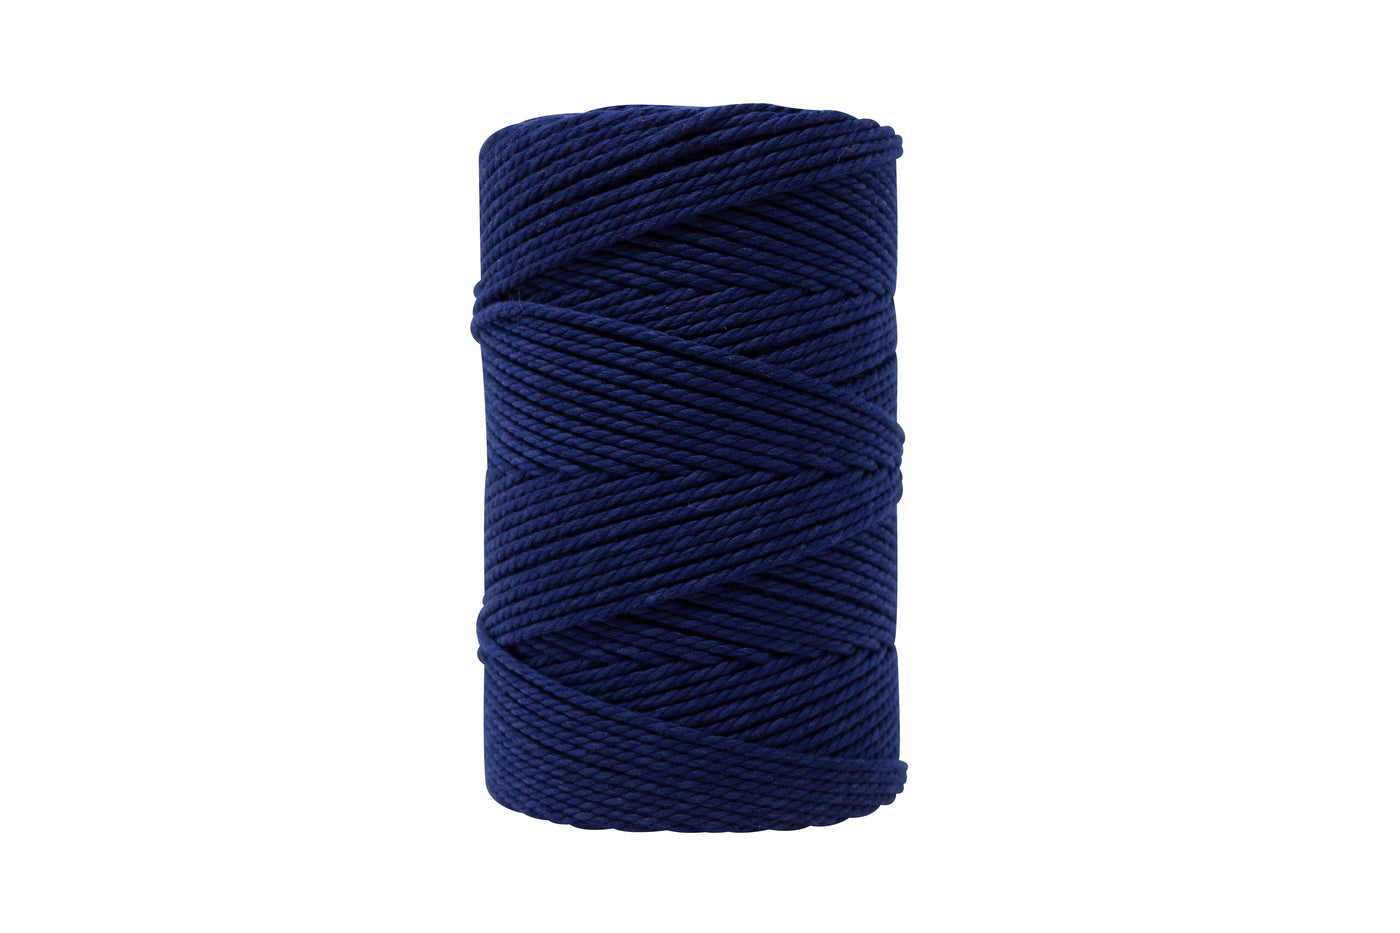 COTTON ROPE 2 MM - 3 PLY - NAVY BLUE COLOR